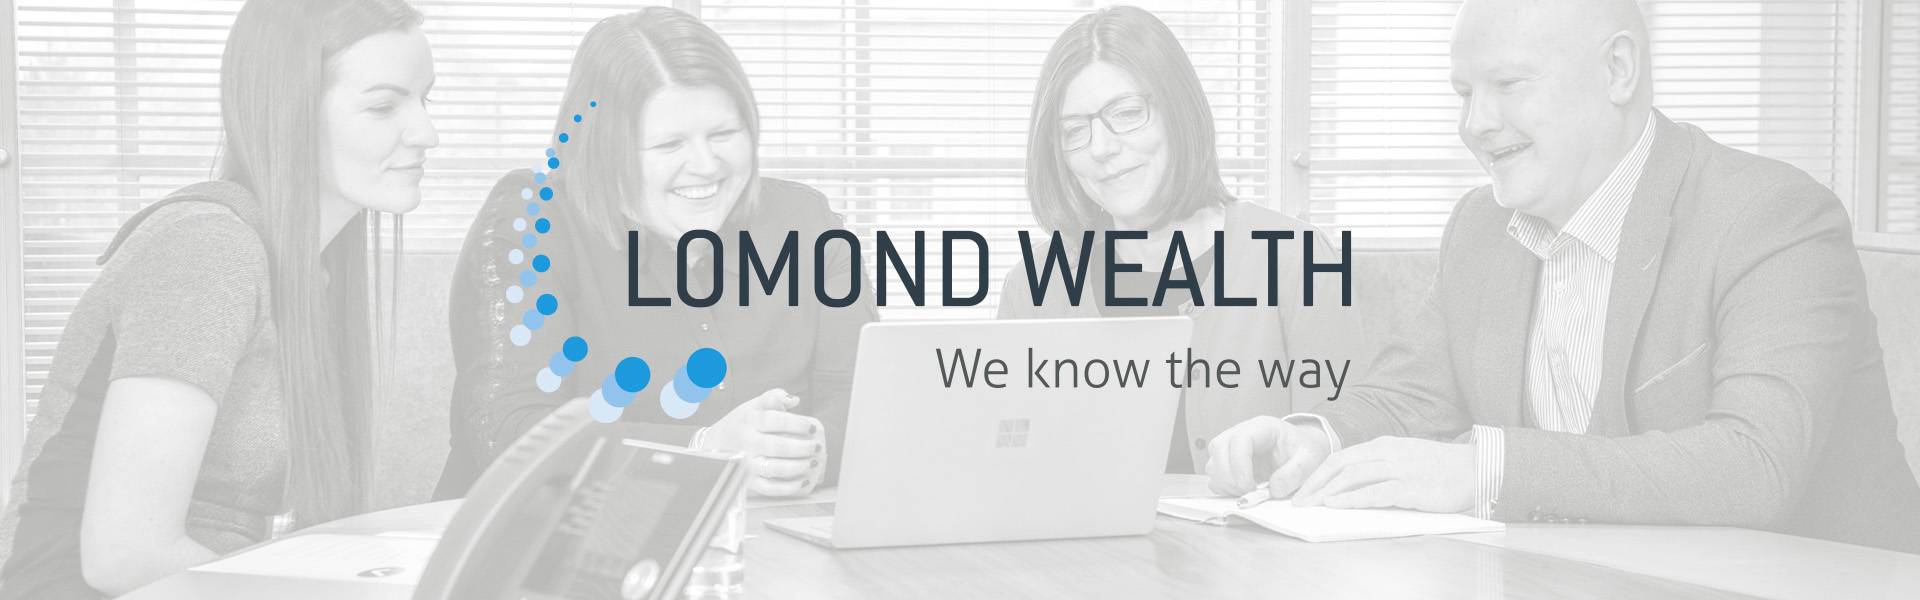 Lomond Wealth Team Around a laptop, with the logo and tagline: We know the way, in the foreground